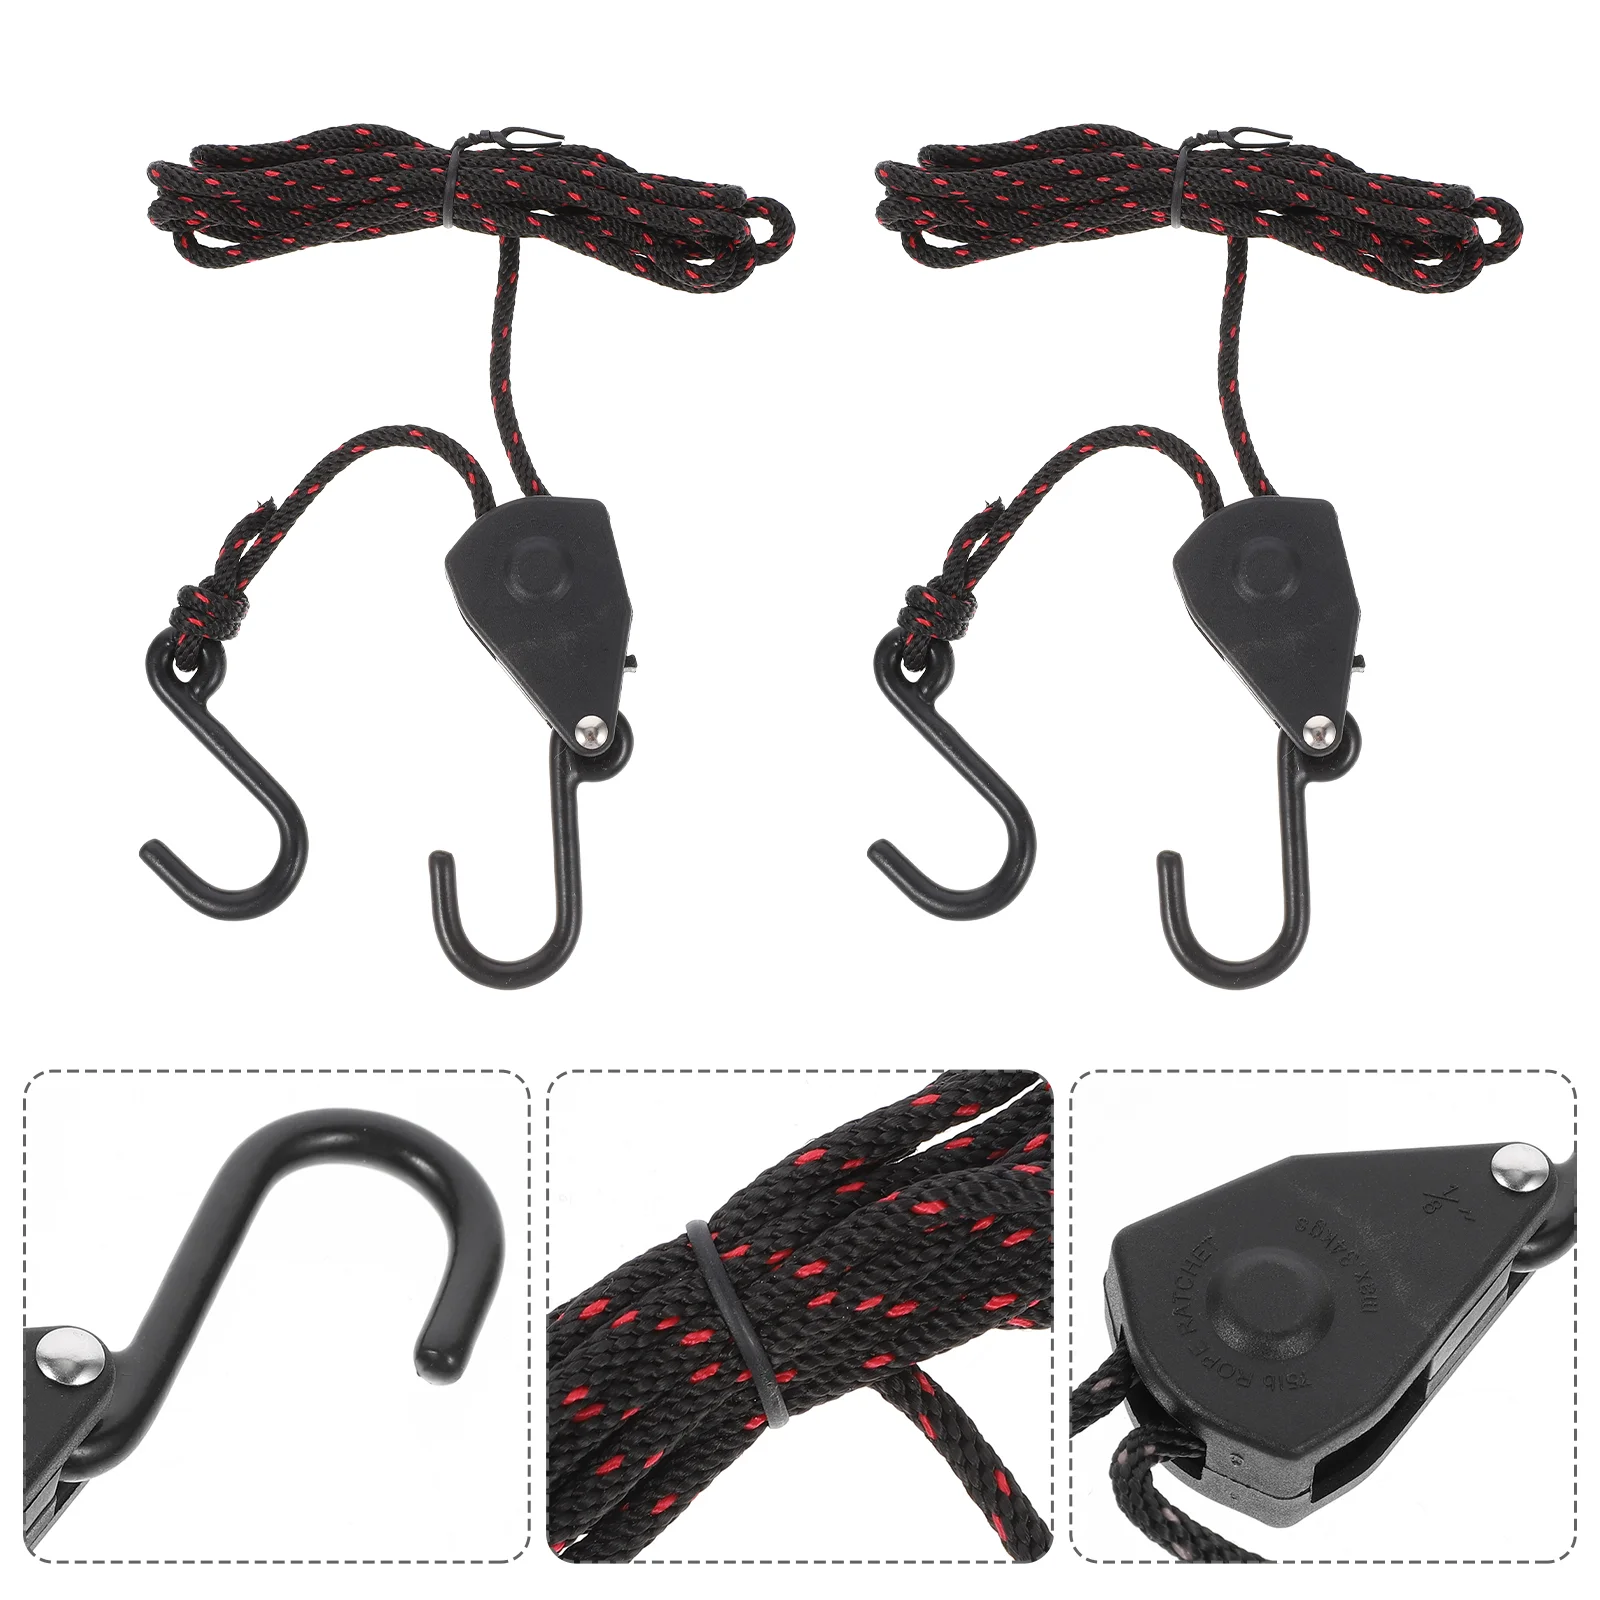 

Cargo Ratchet Pulley Rope Hanger 2PCS Kayak Tie Down Straps Canoe Bow and Stern Adjustable Rope Hanger